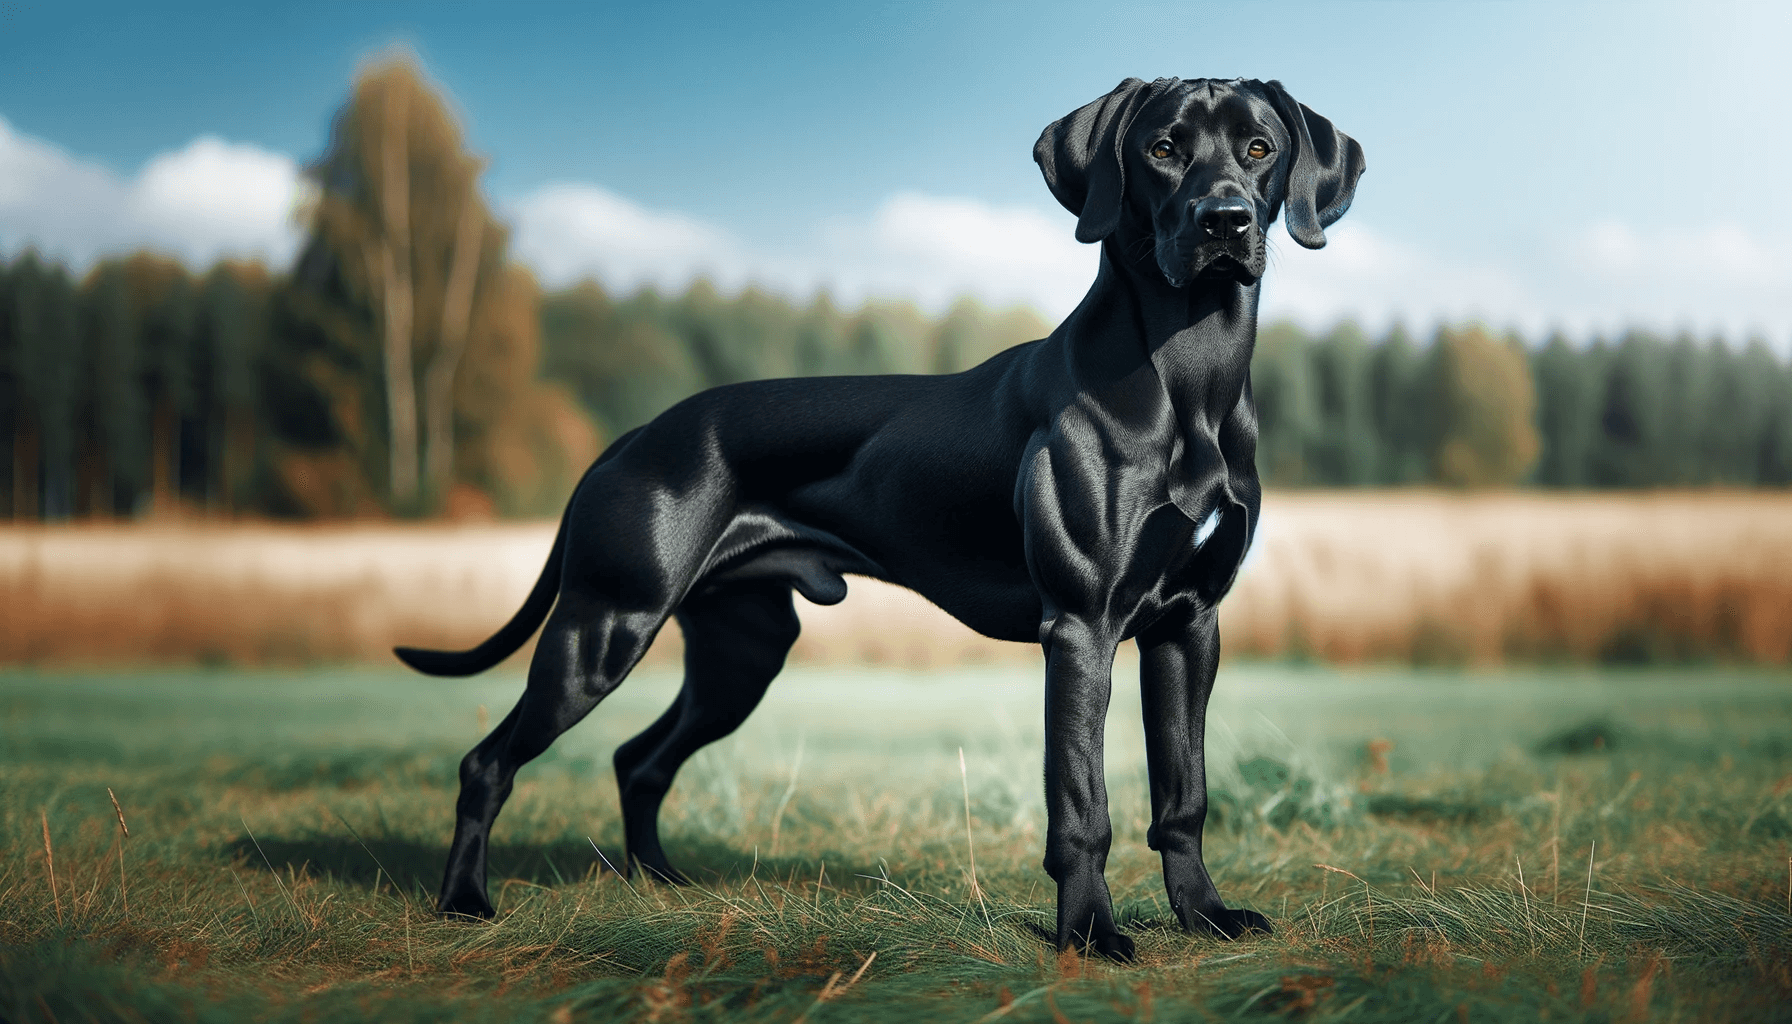 A black hound lab mix in a poised stance, showing off its athletic build